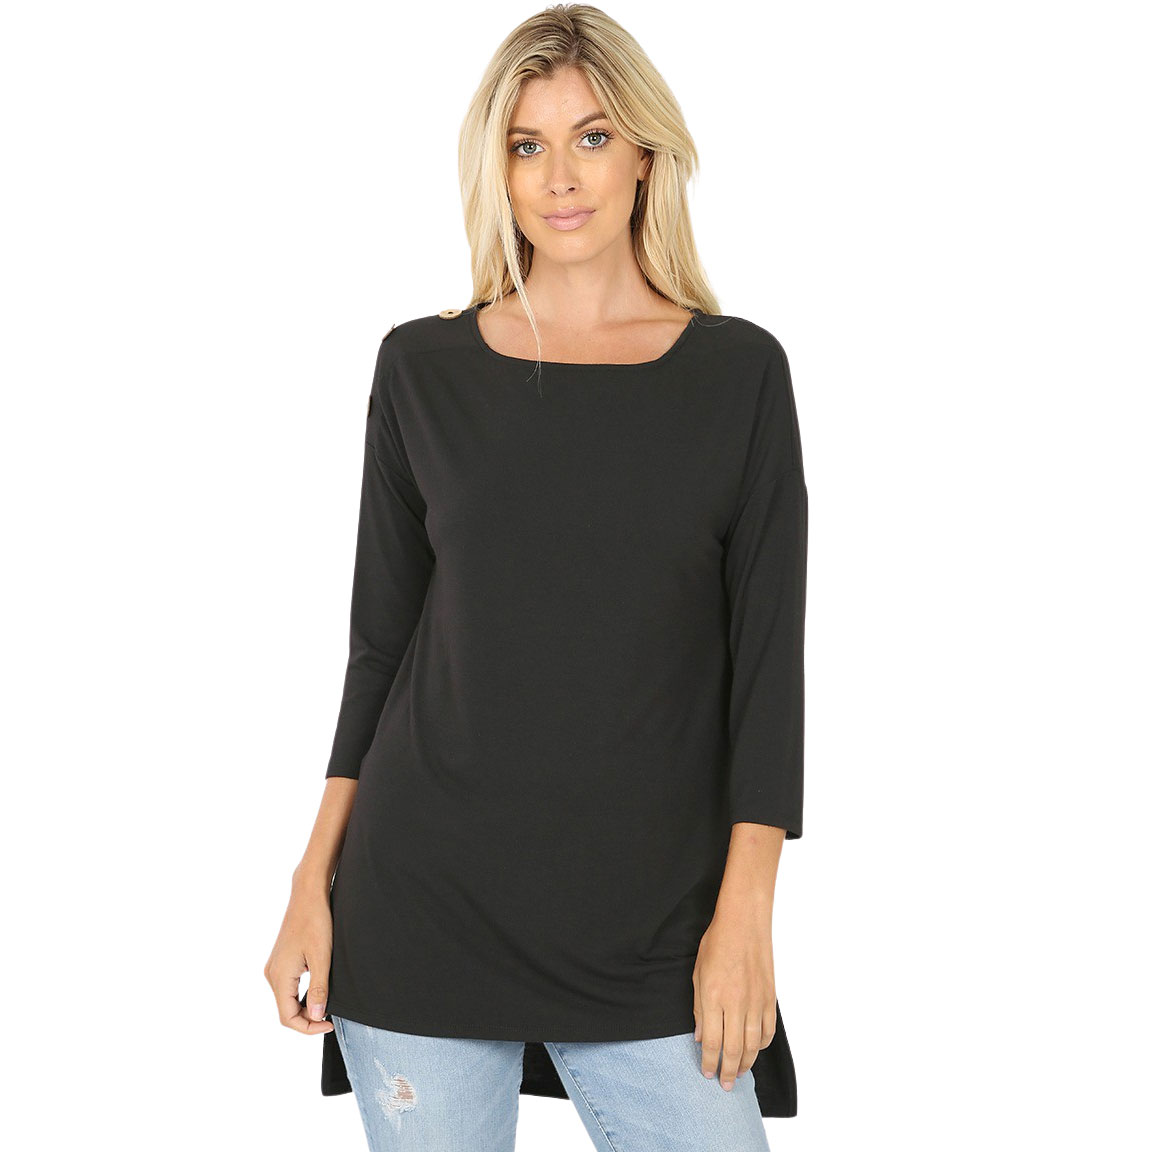 Black Boat Neck Hi-Lo Top w/ Wooden Buttons 2082